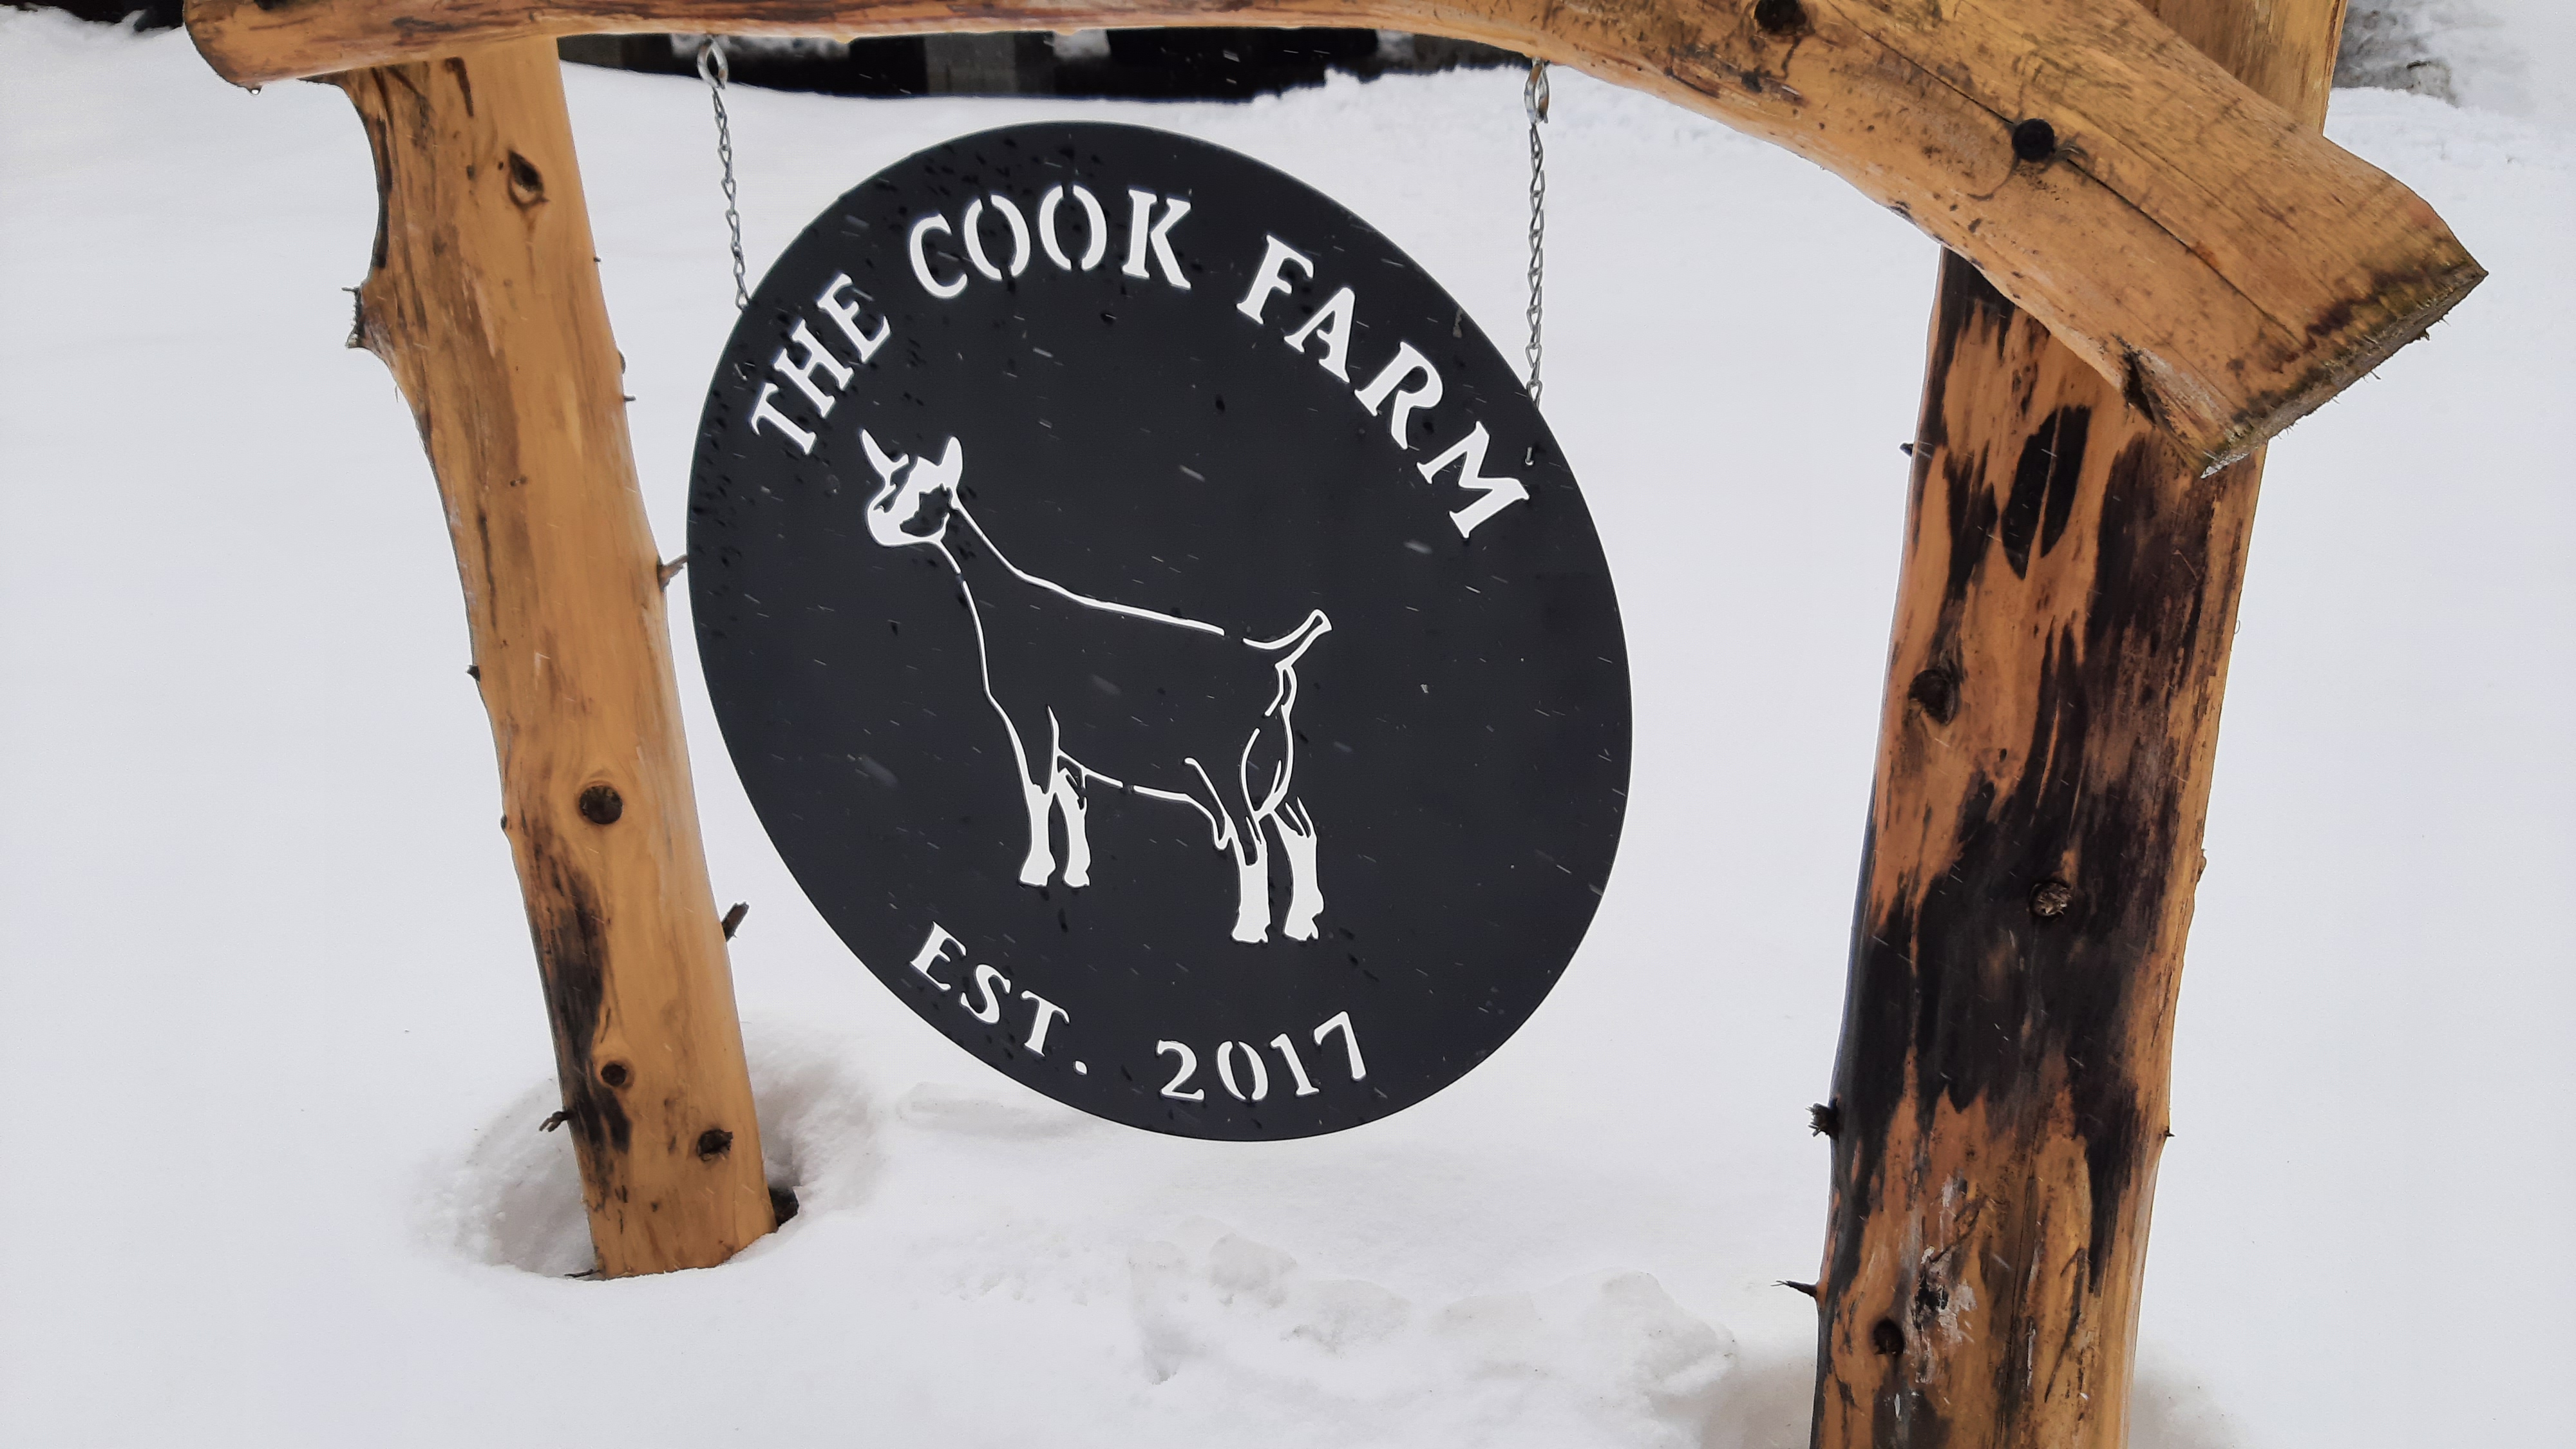 Sign for Cook Farm